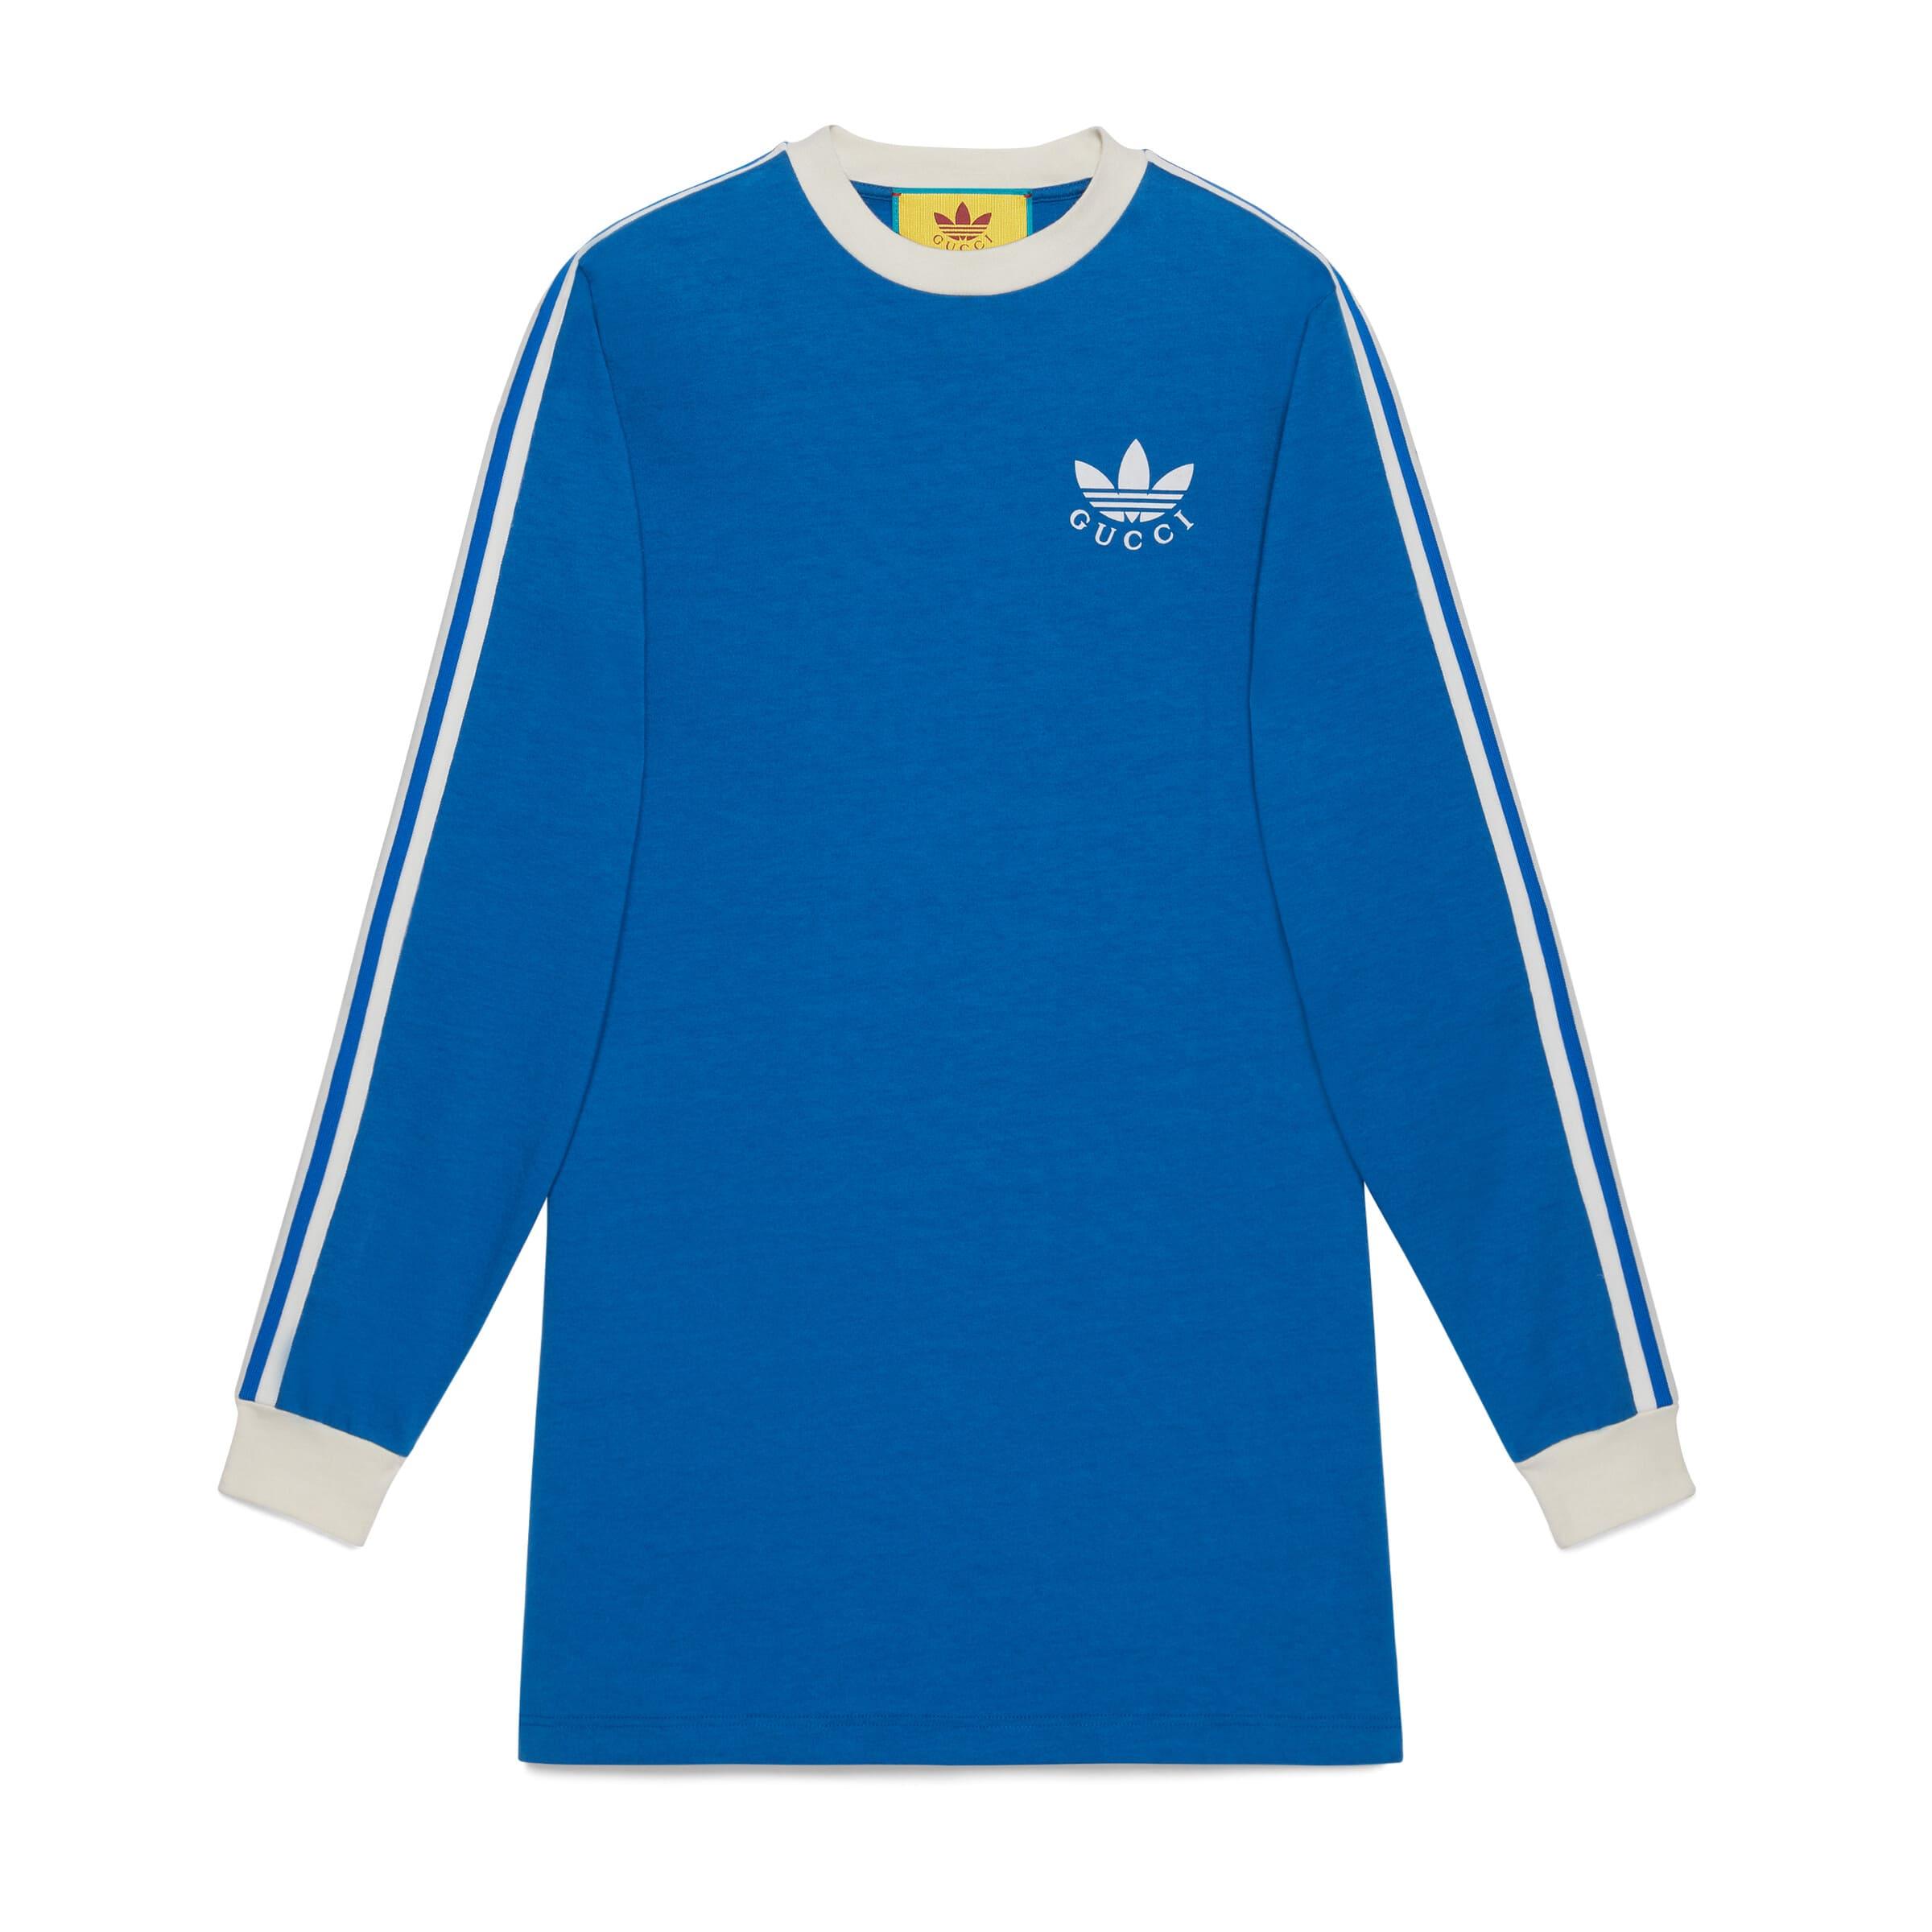 Adidas Trefoil-embroidered Corset Top - Farfetch